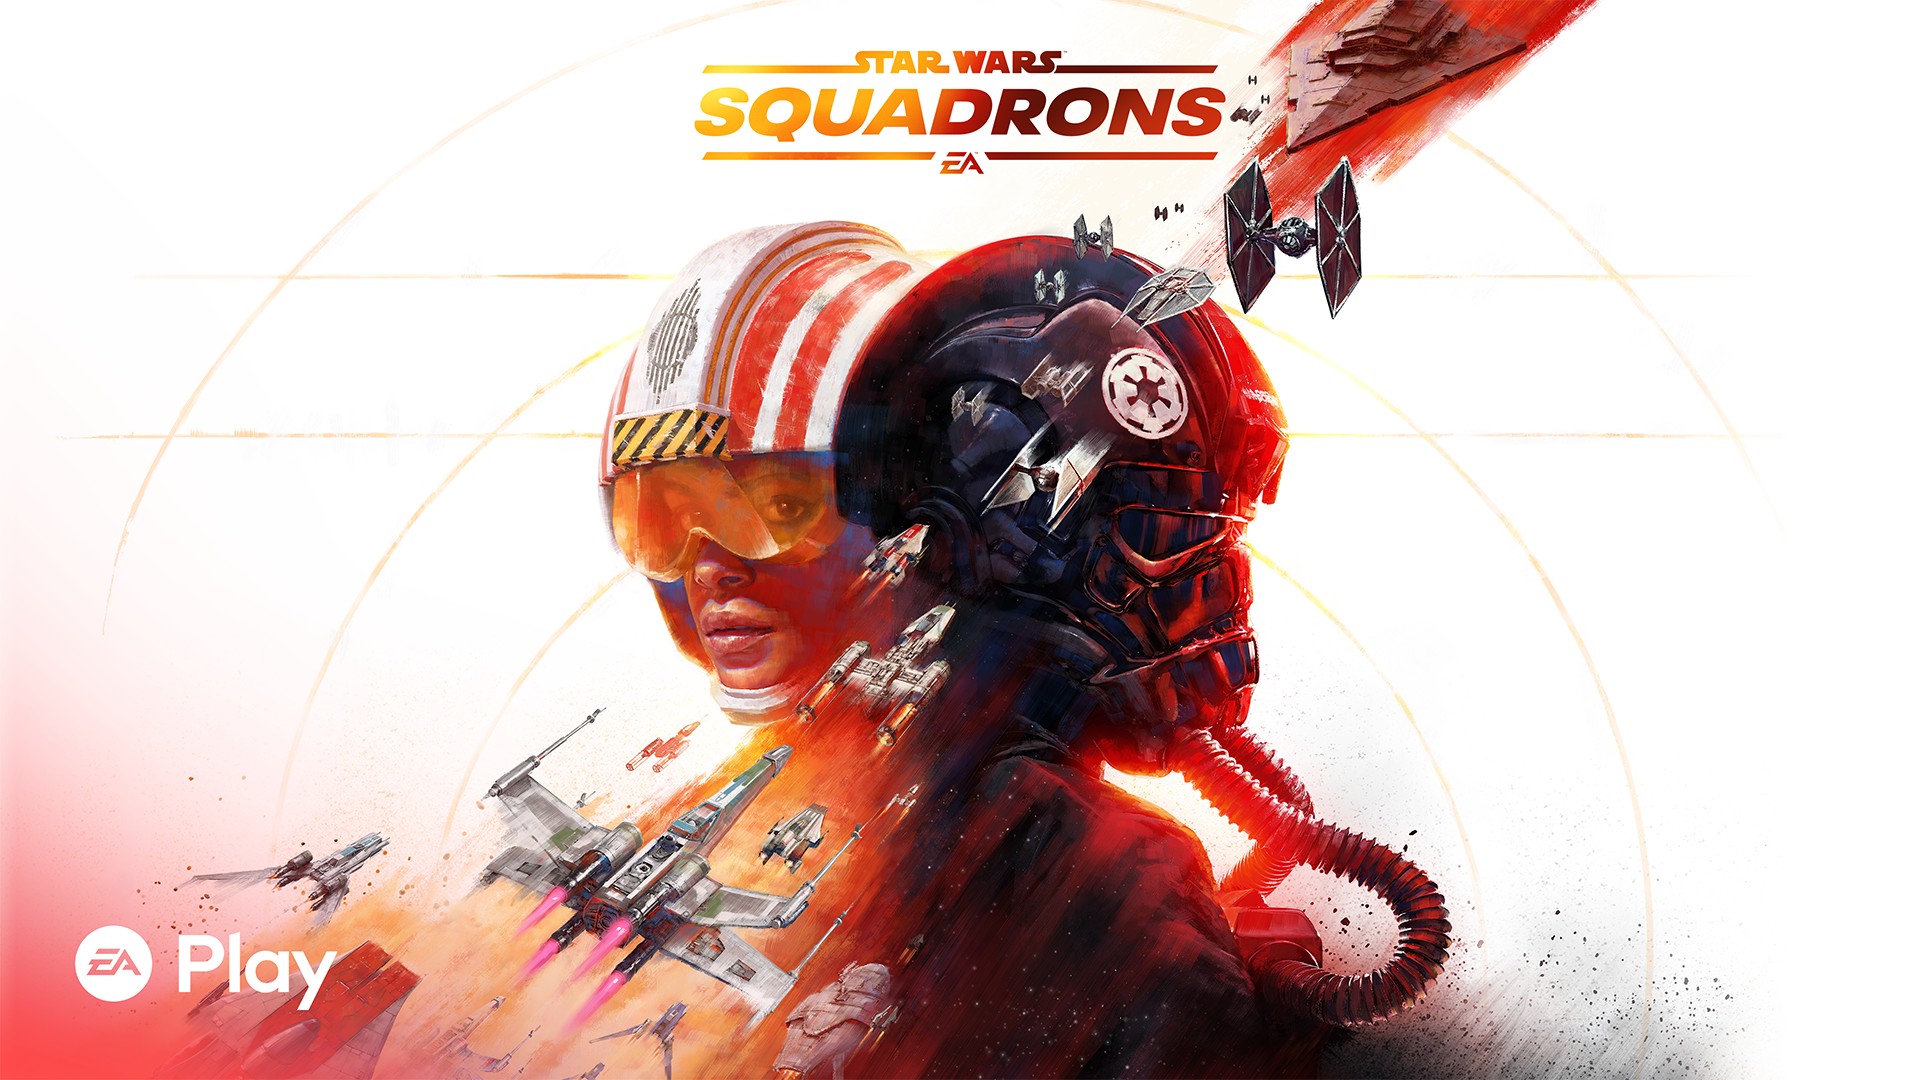 Neu im Xbox Game Pass: Outriders, Star Wars: Squadrons und mehr!: Star Wars: Squadrons